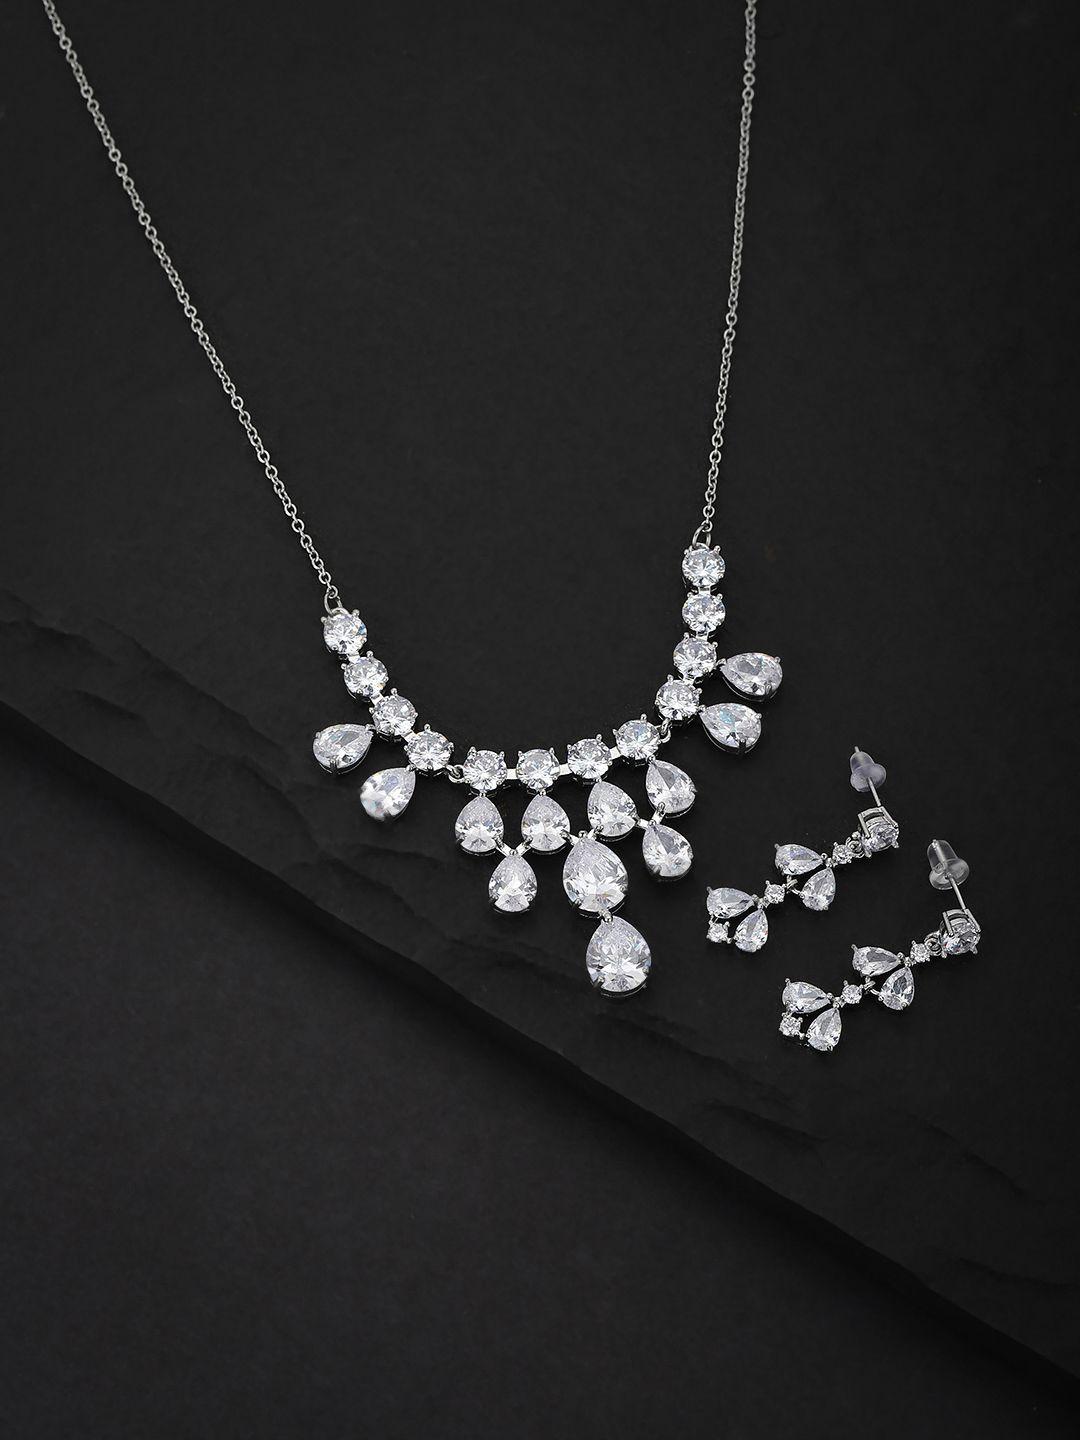 carlton-london-silver-toned-rhodium-plated-handcrafted-cz-studded-jewellery-set